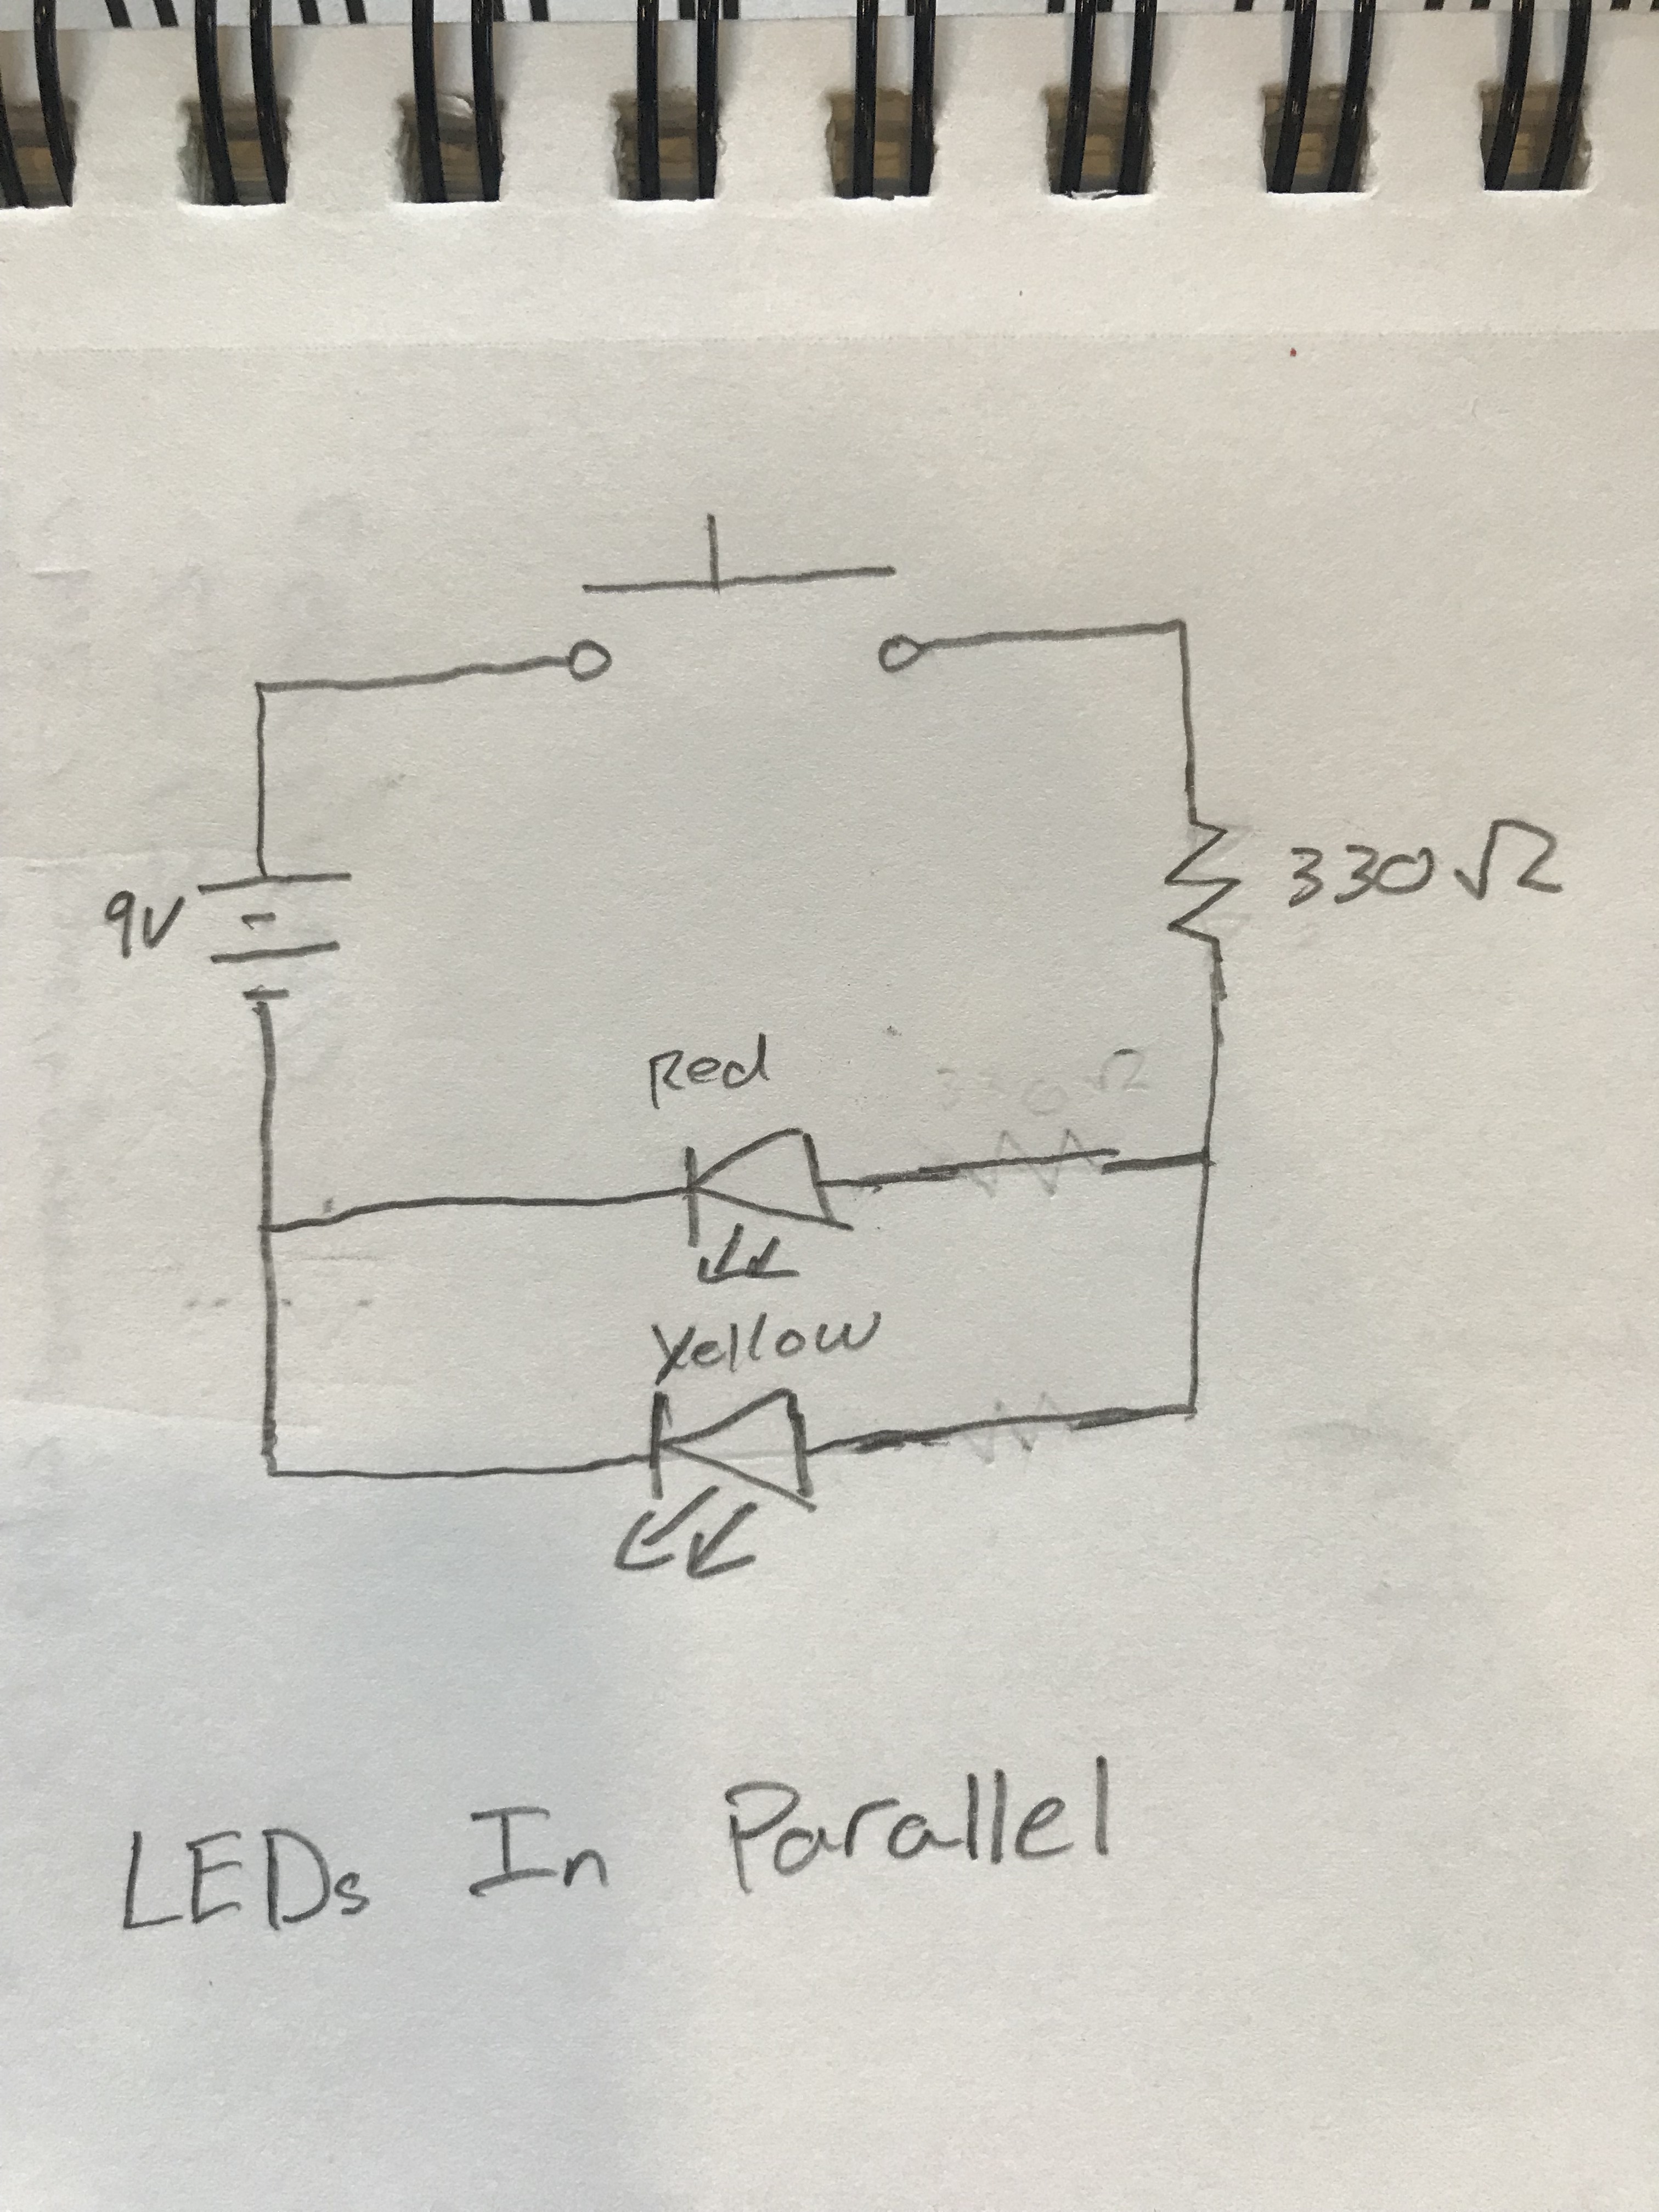 LEDs-in-parallel-schematic